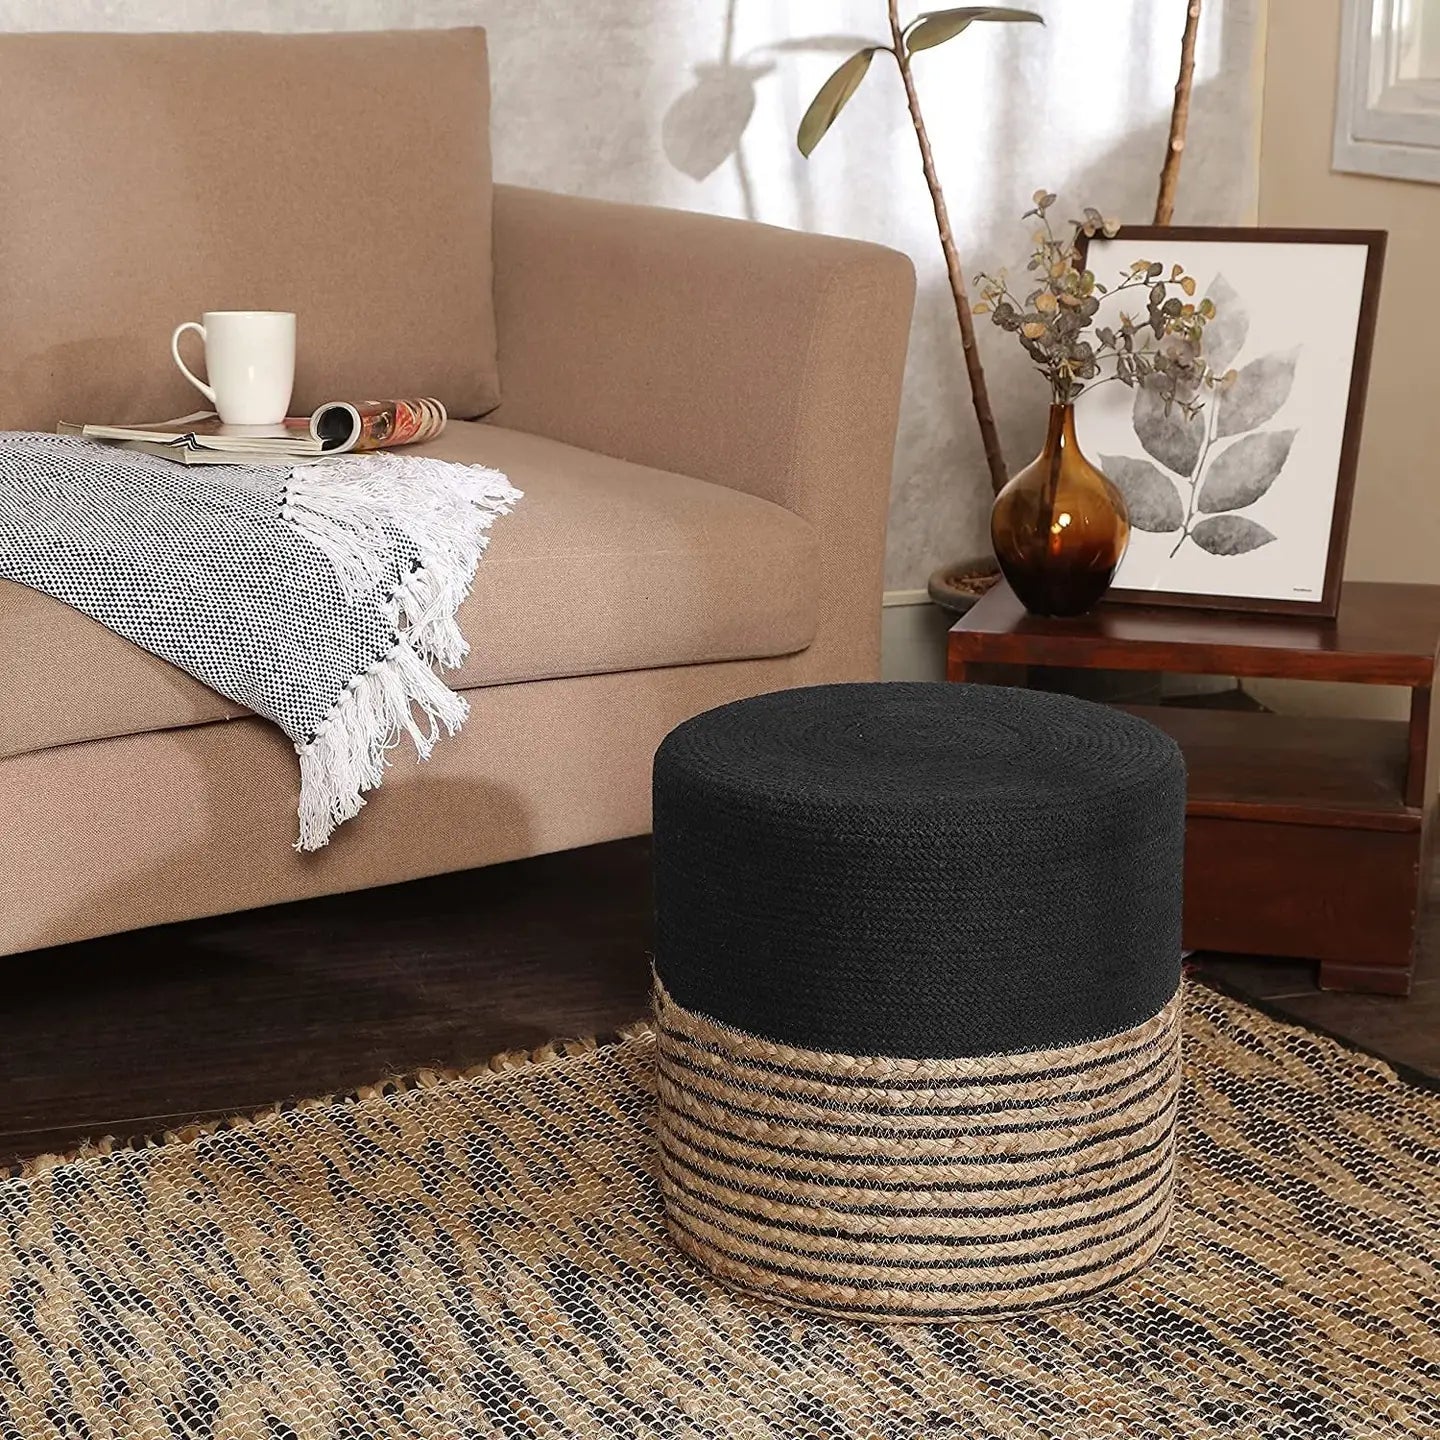 Ottoman: Cylindrical Poof - Foot Stool